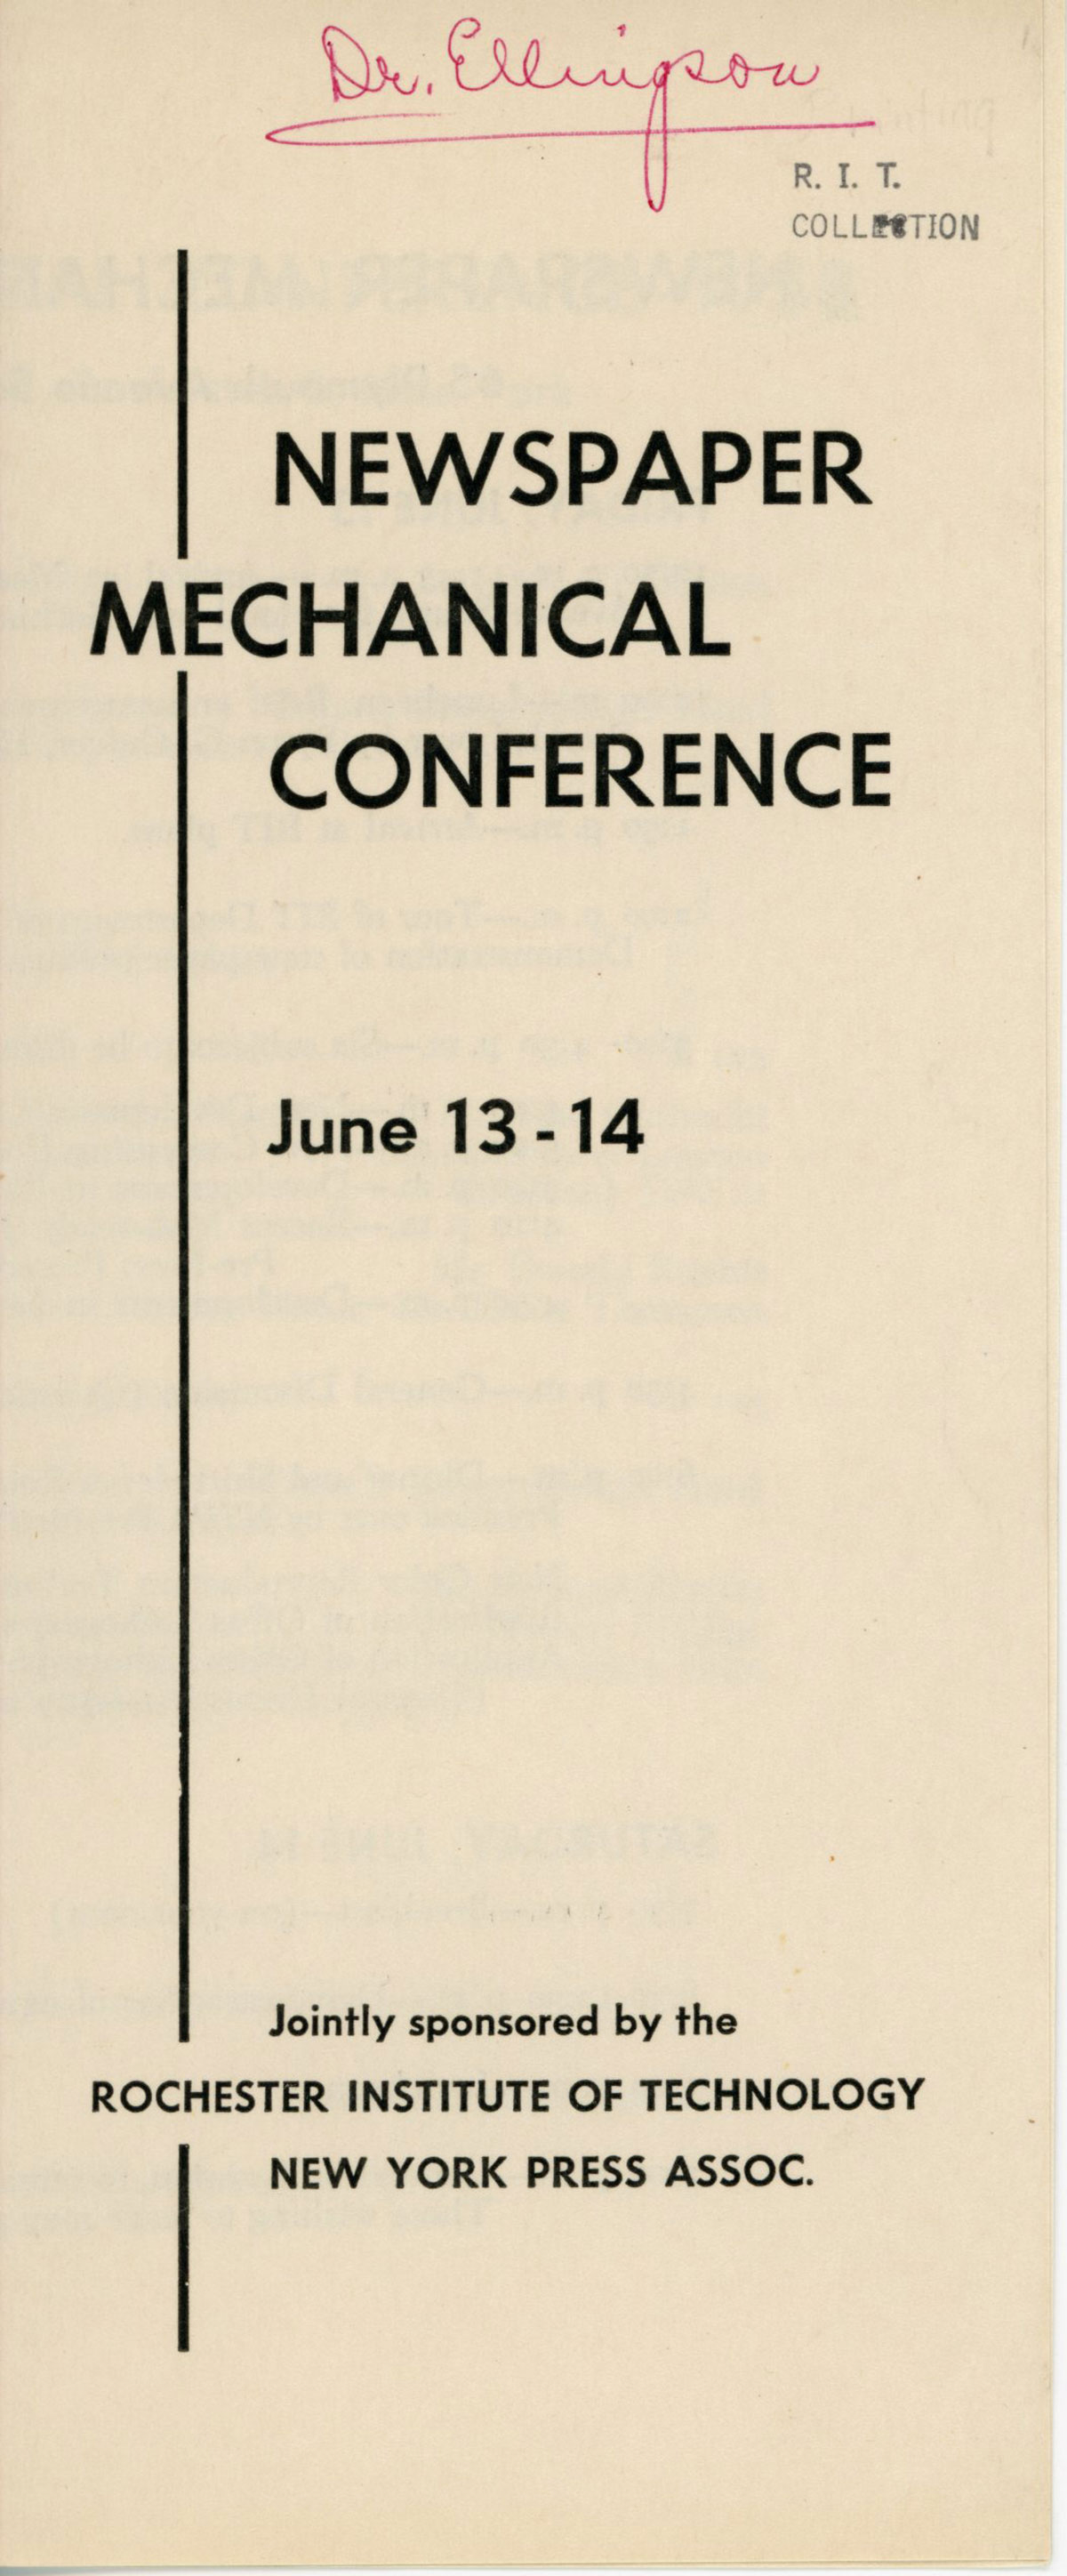 Newspaper Mechanical Conference June 13-14 Jointly sponsored by the Rochester Institute of Technology New York Press Assoc.